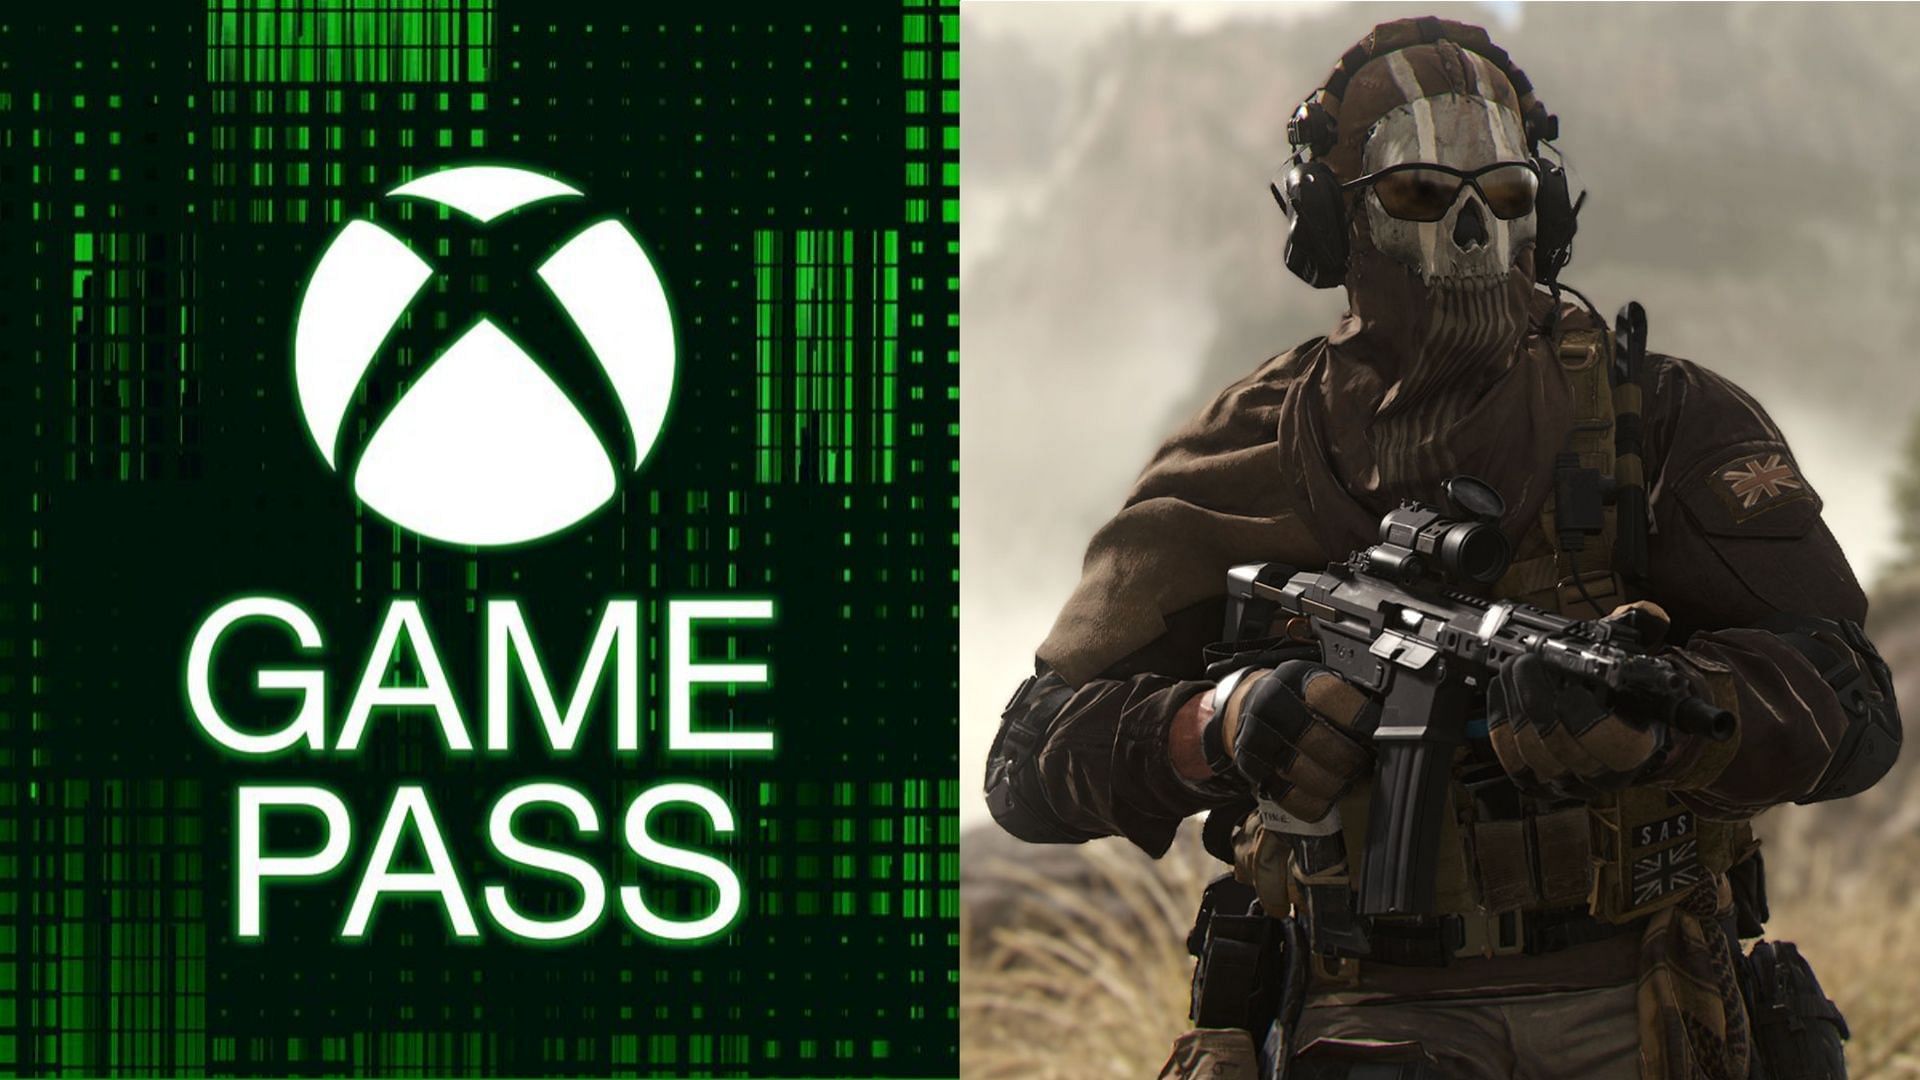 Xbox Game Pass logo on the left and Ghost from Modern Warfare 2 on the right.